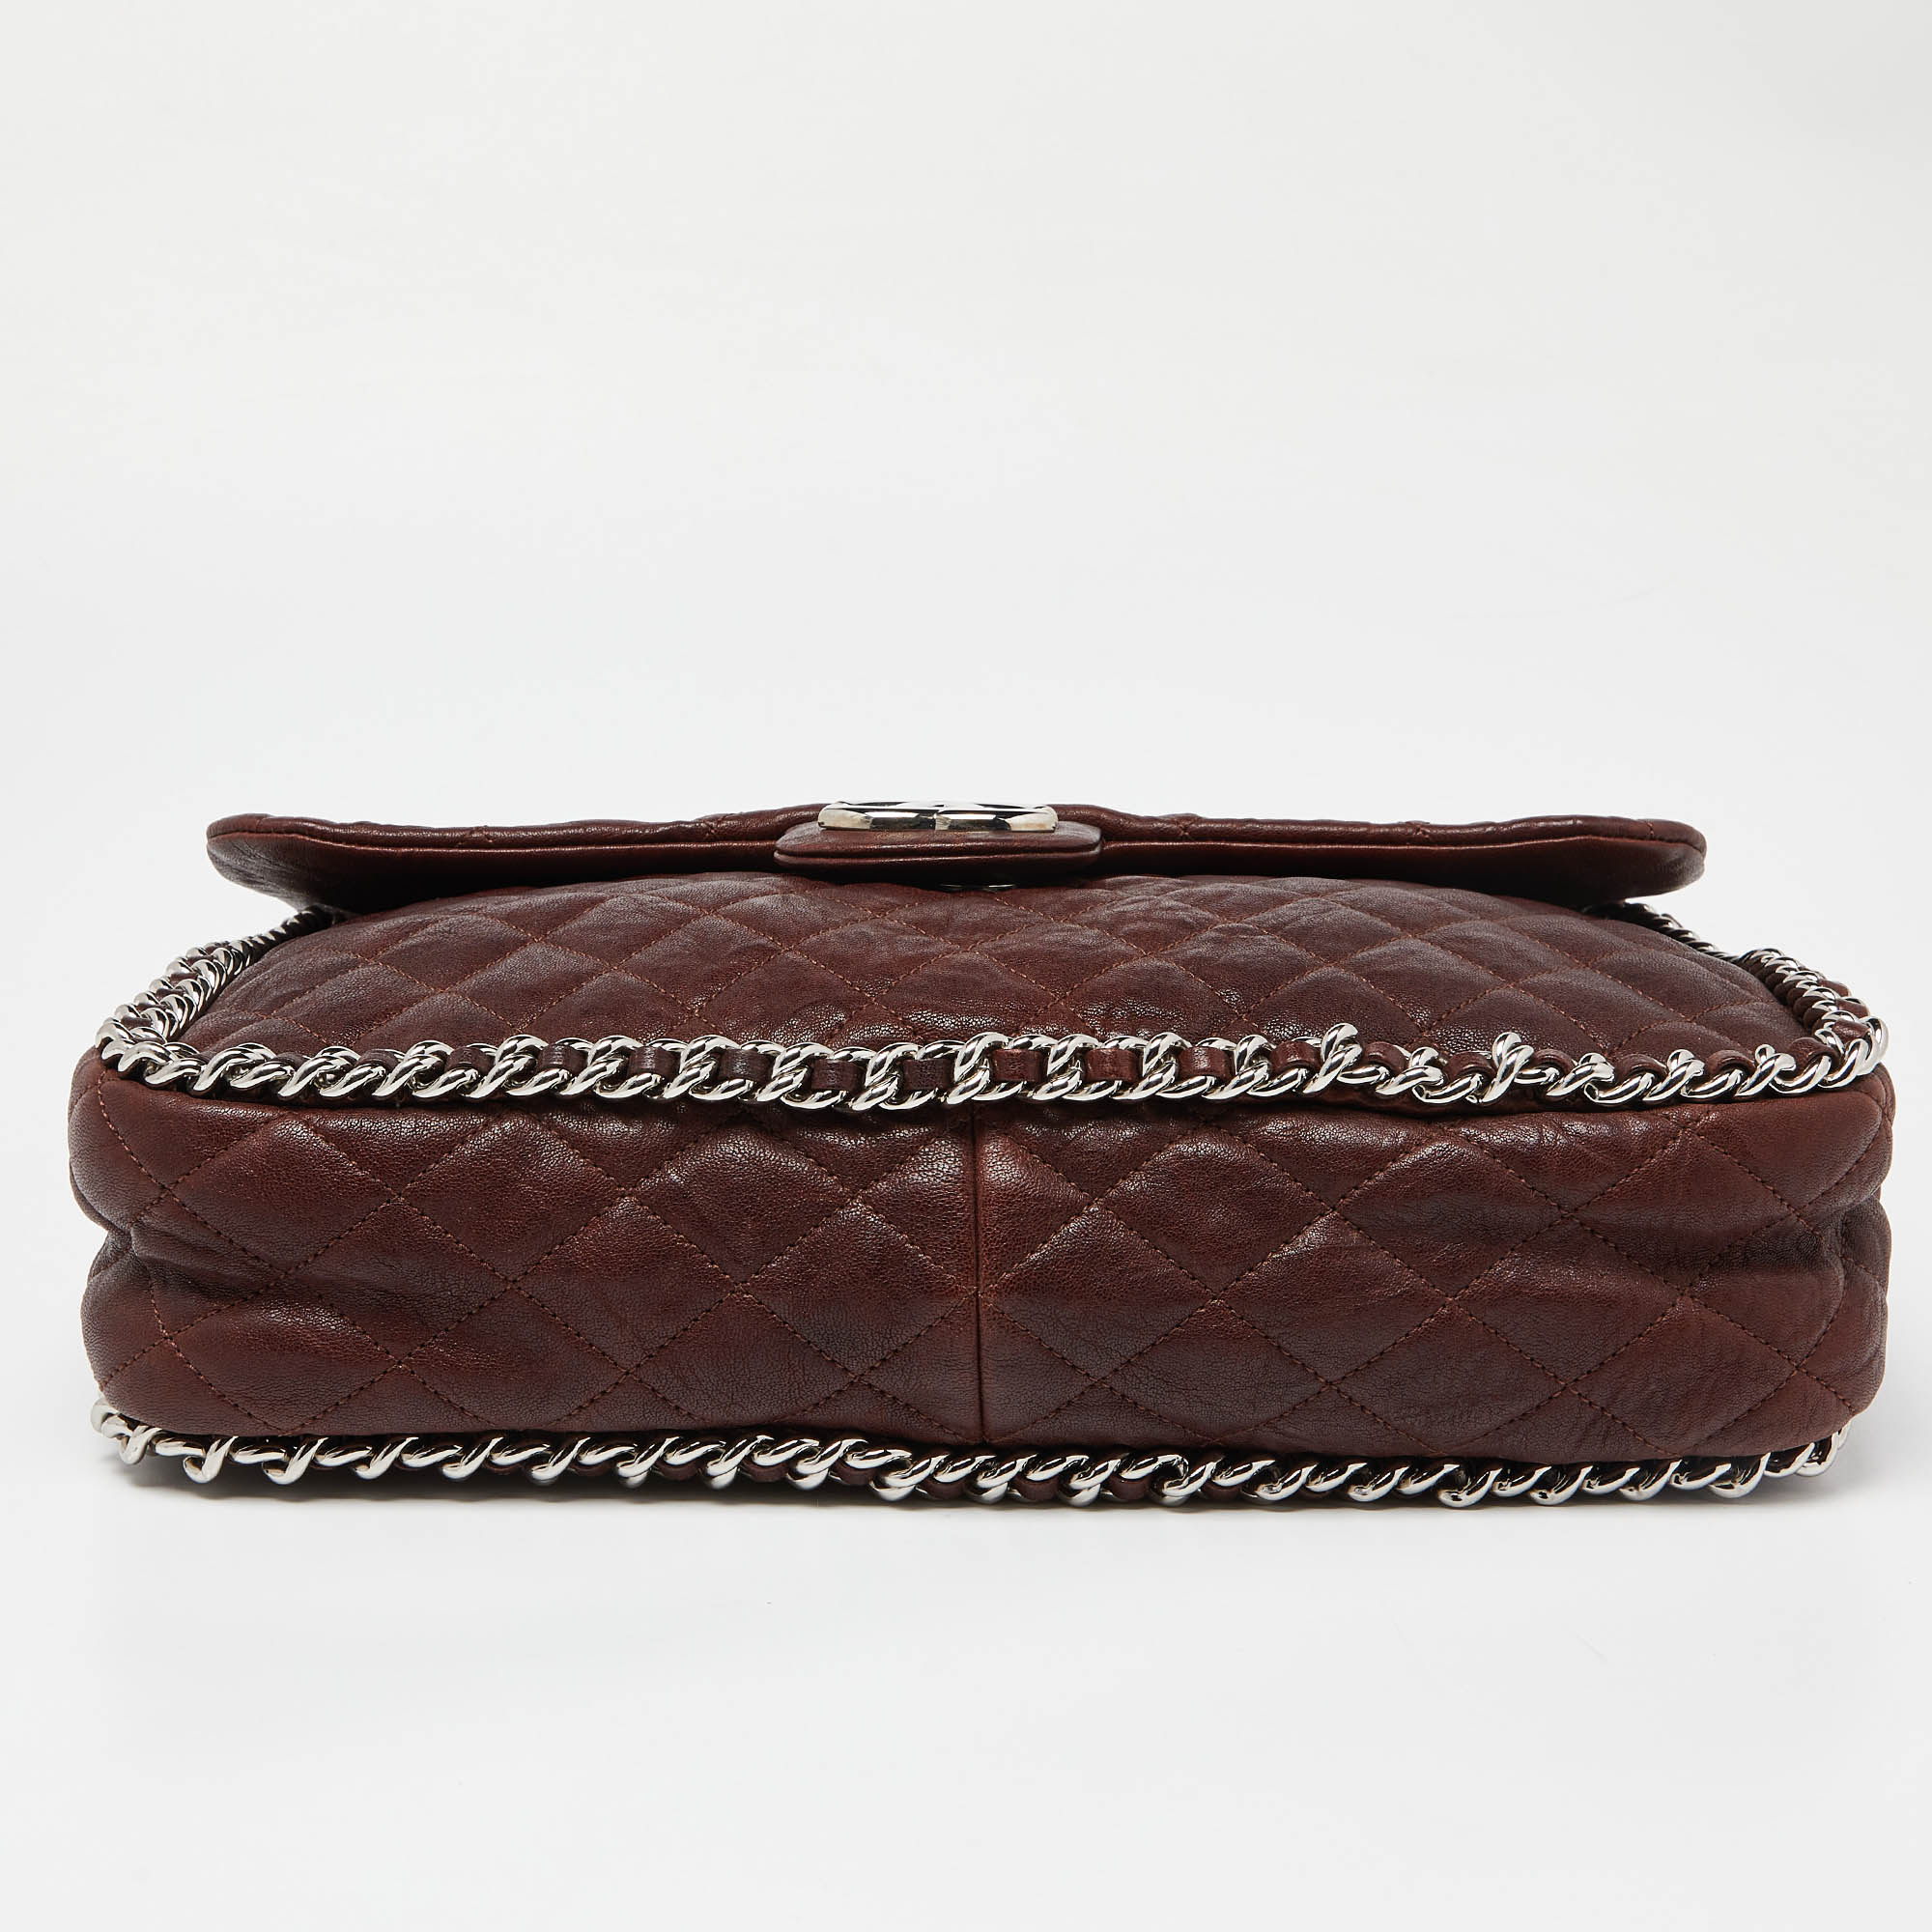 Chanel Burgundy Quilted Leather Maxi Chain Around Flap Bag